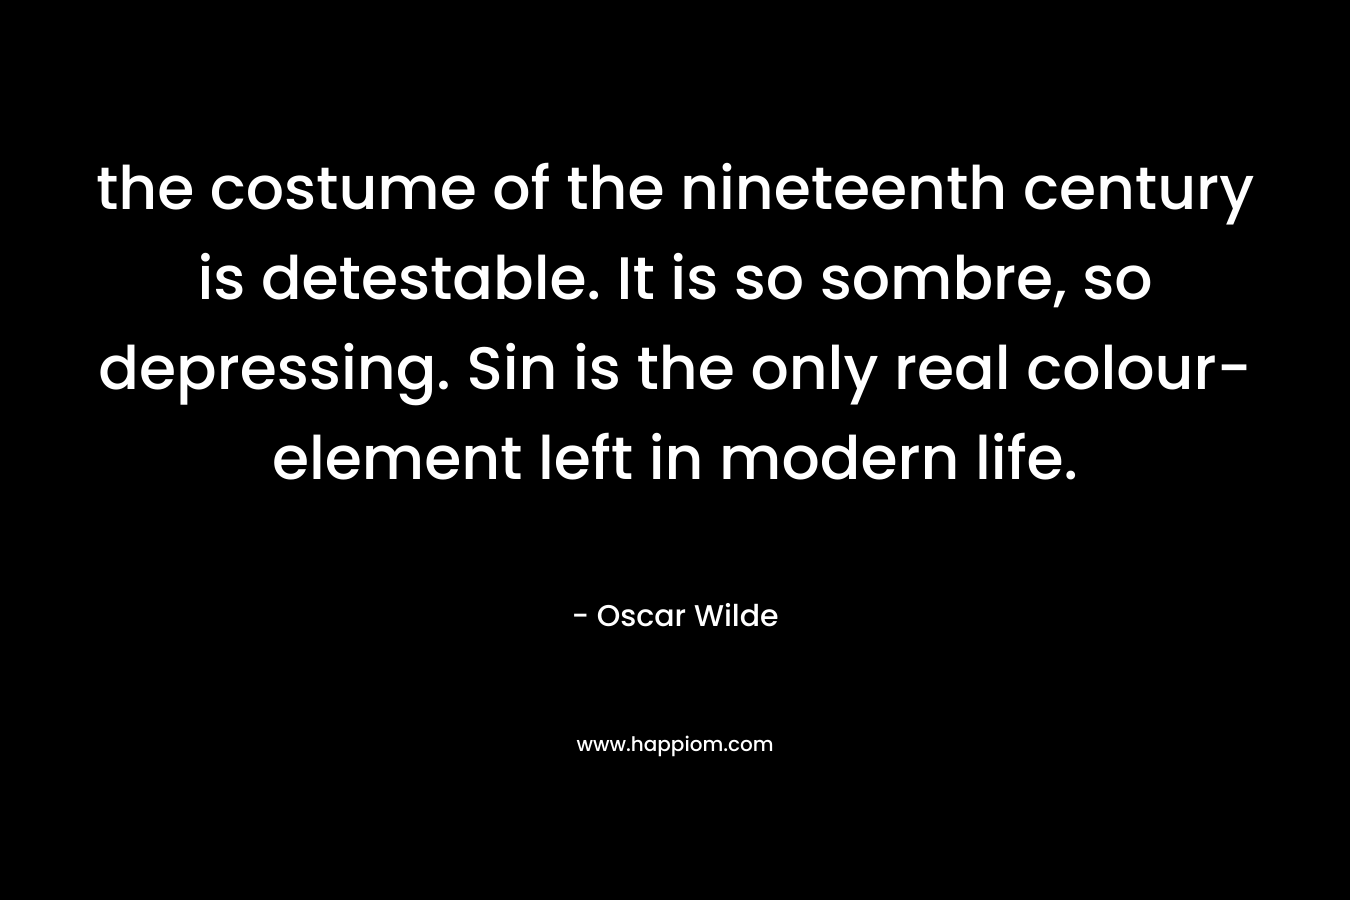 the costume of the nineteenth century is detestable. It is so sombre, so depressing. Sin is the only real colour-element left in modern life.